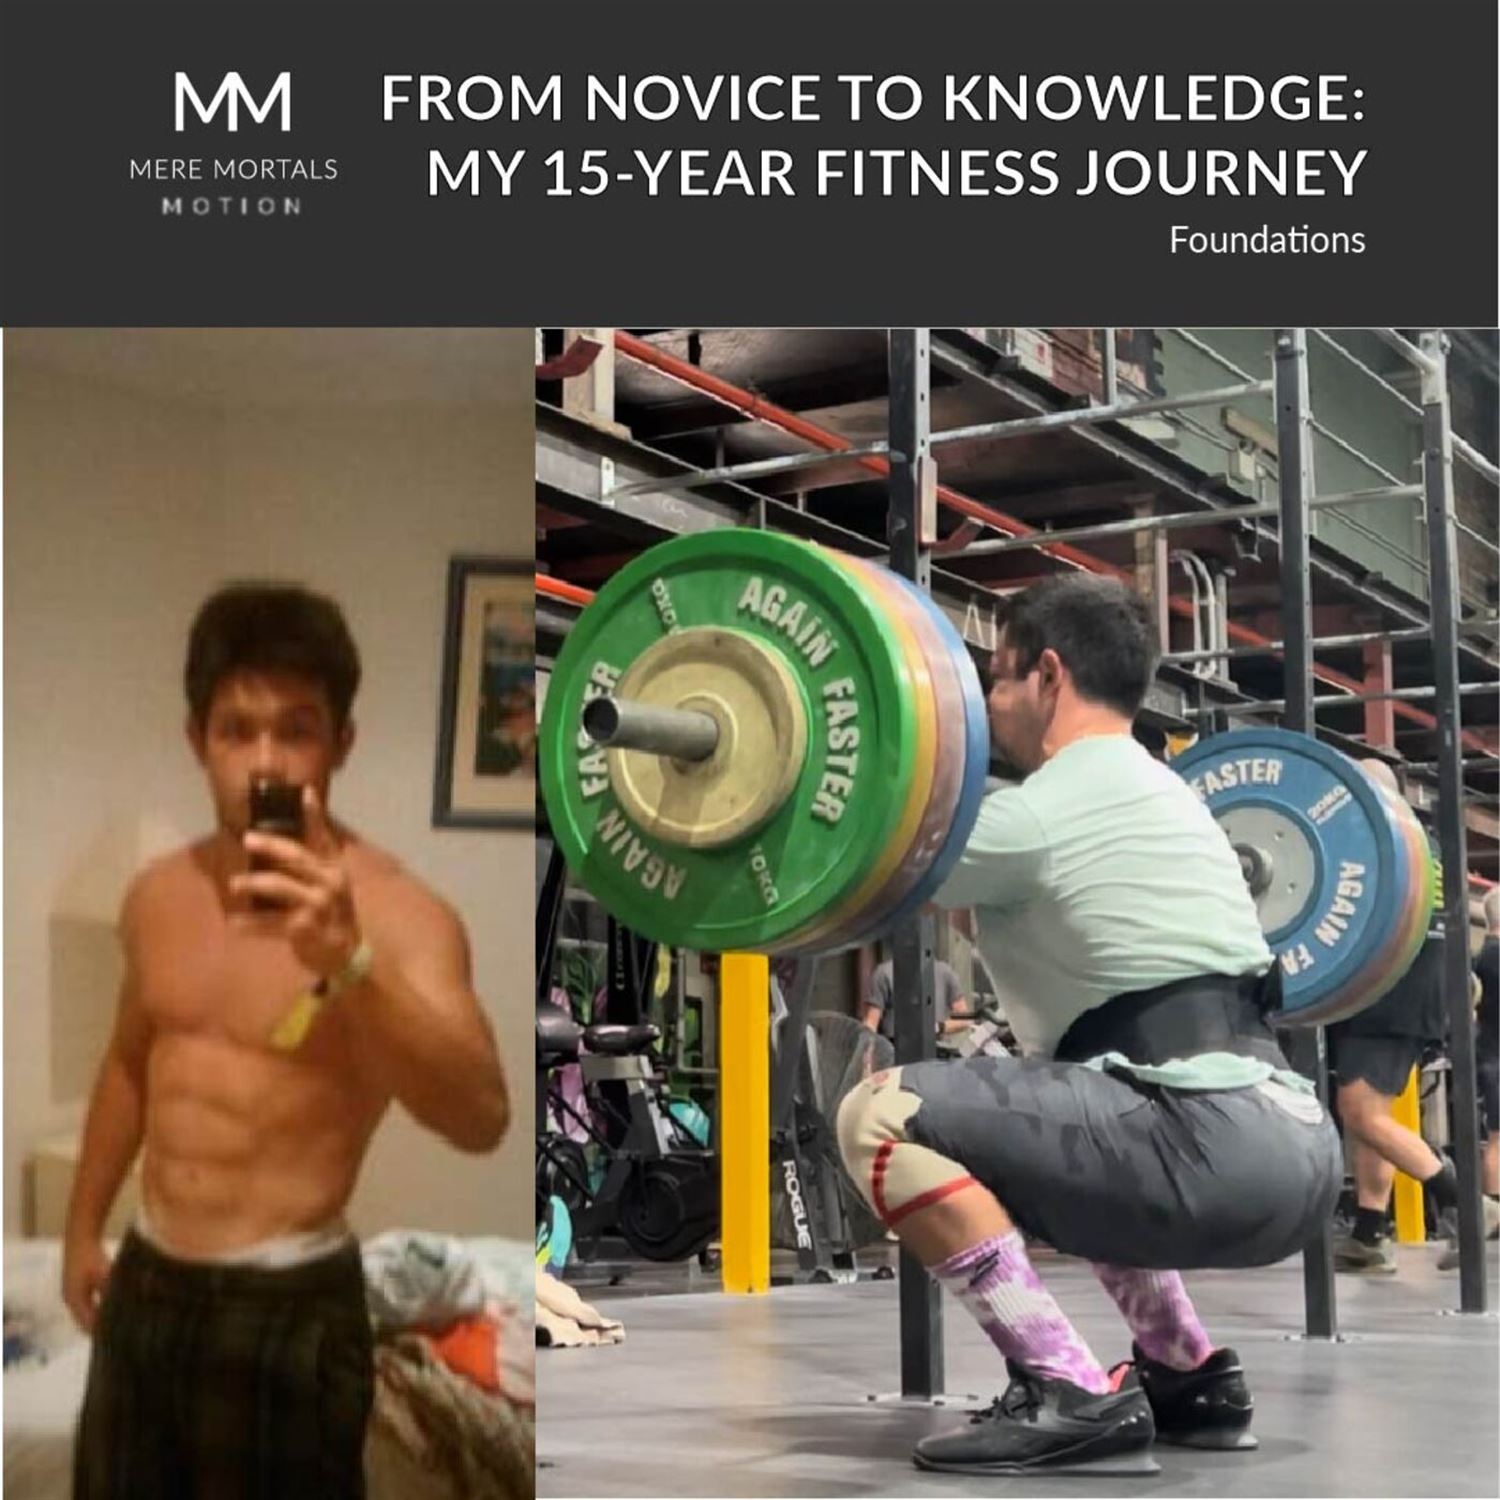 From Novice to Knowledge: Foundations